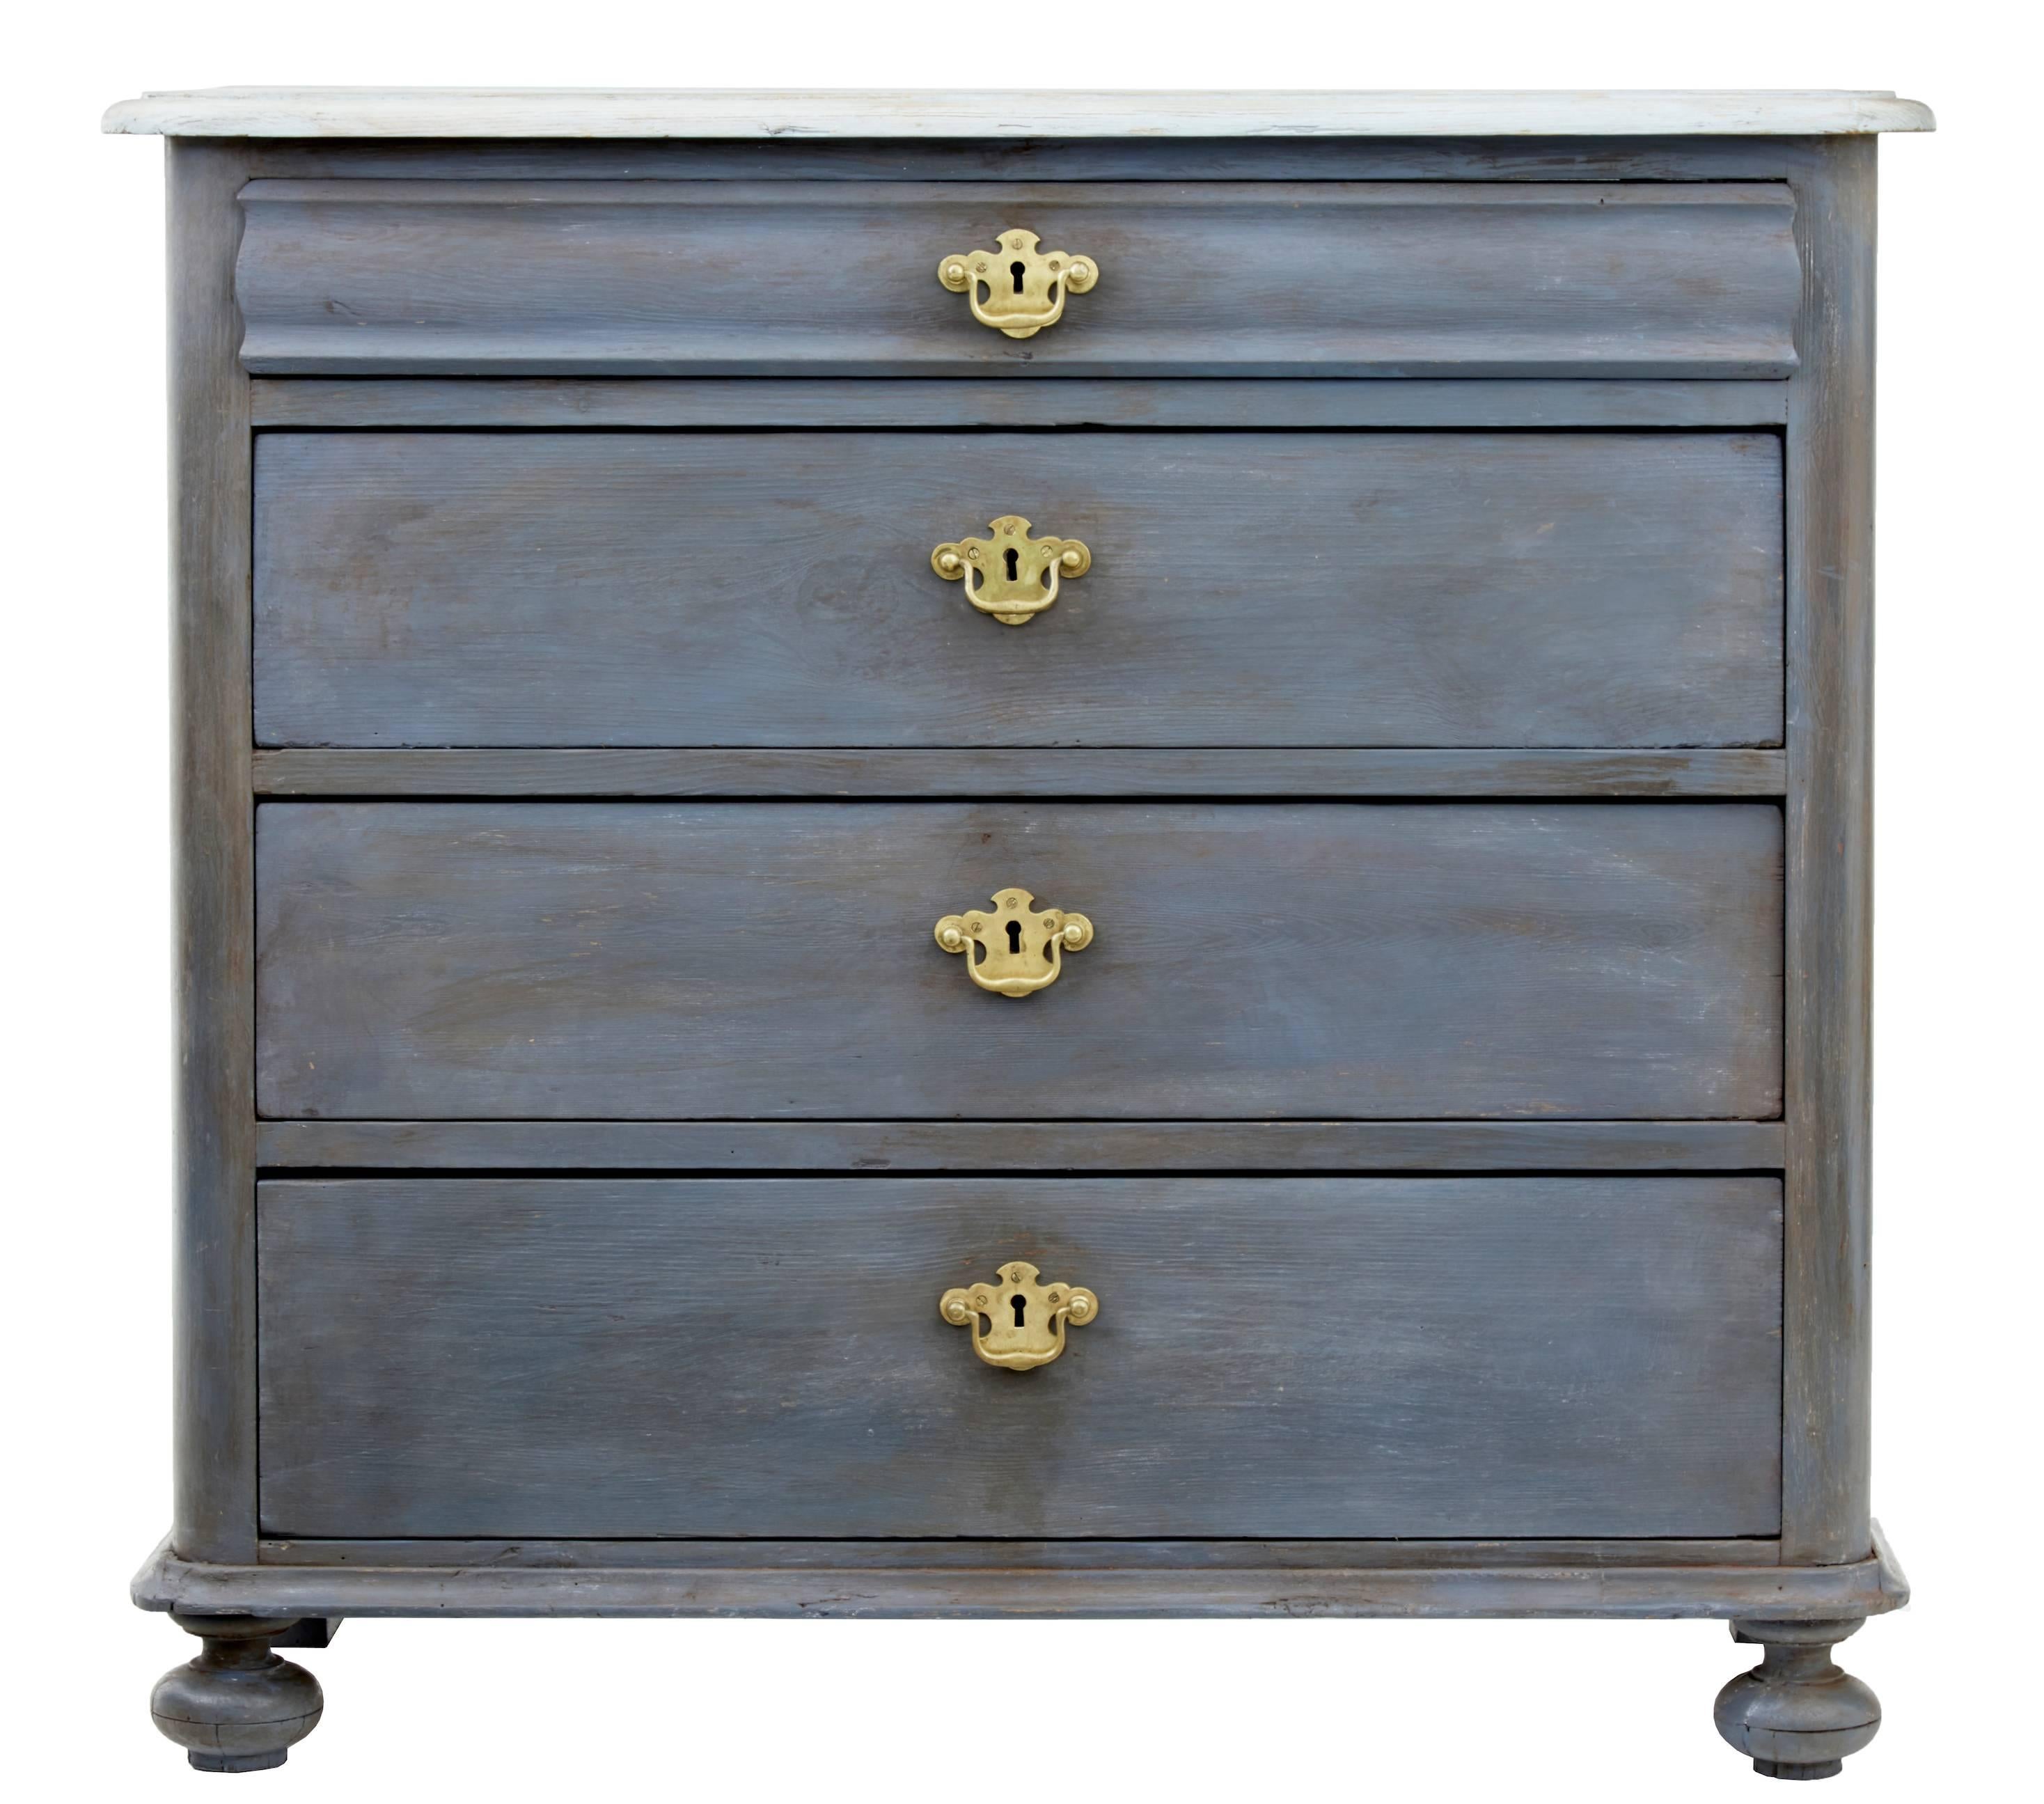 Danish four-drawer commode, circa 1870.
Shaped top drawer with a further three graduating drawers with later brass handles.
Later weathered paint, with contrasting off-white top.
Bun feet to the front with block feet to the back.

Measure: